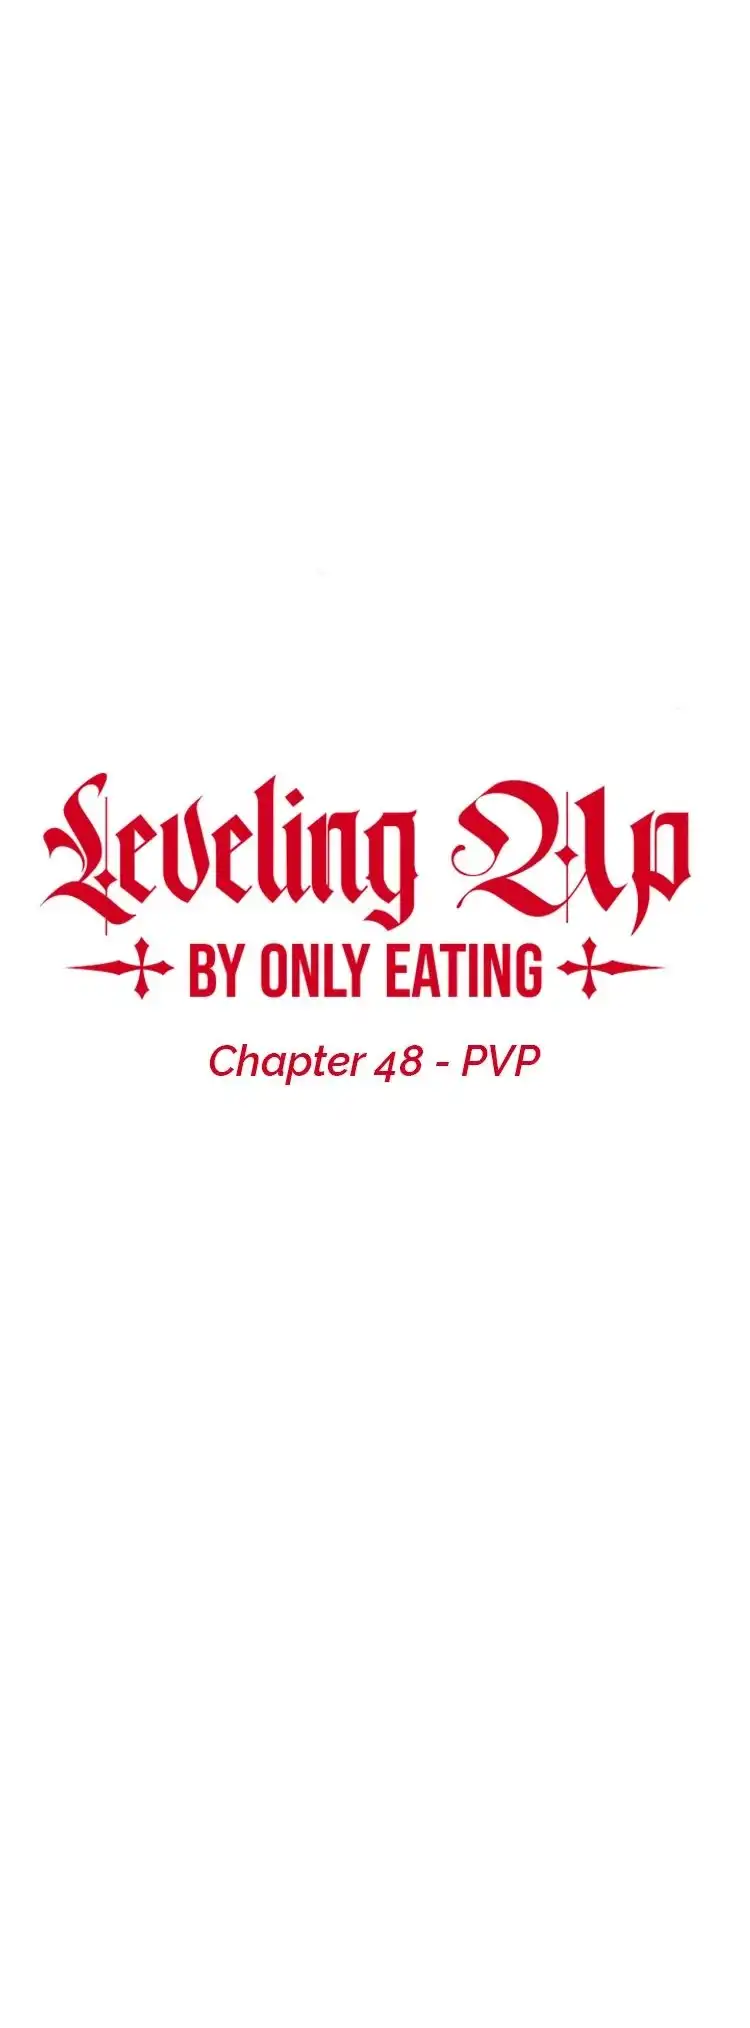 Leveling Up, By Only Eating! Chapter 48